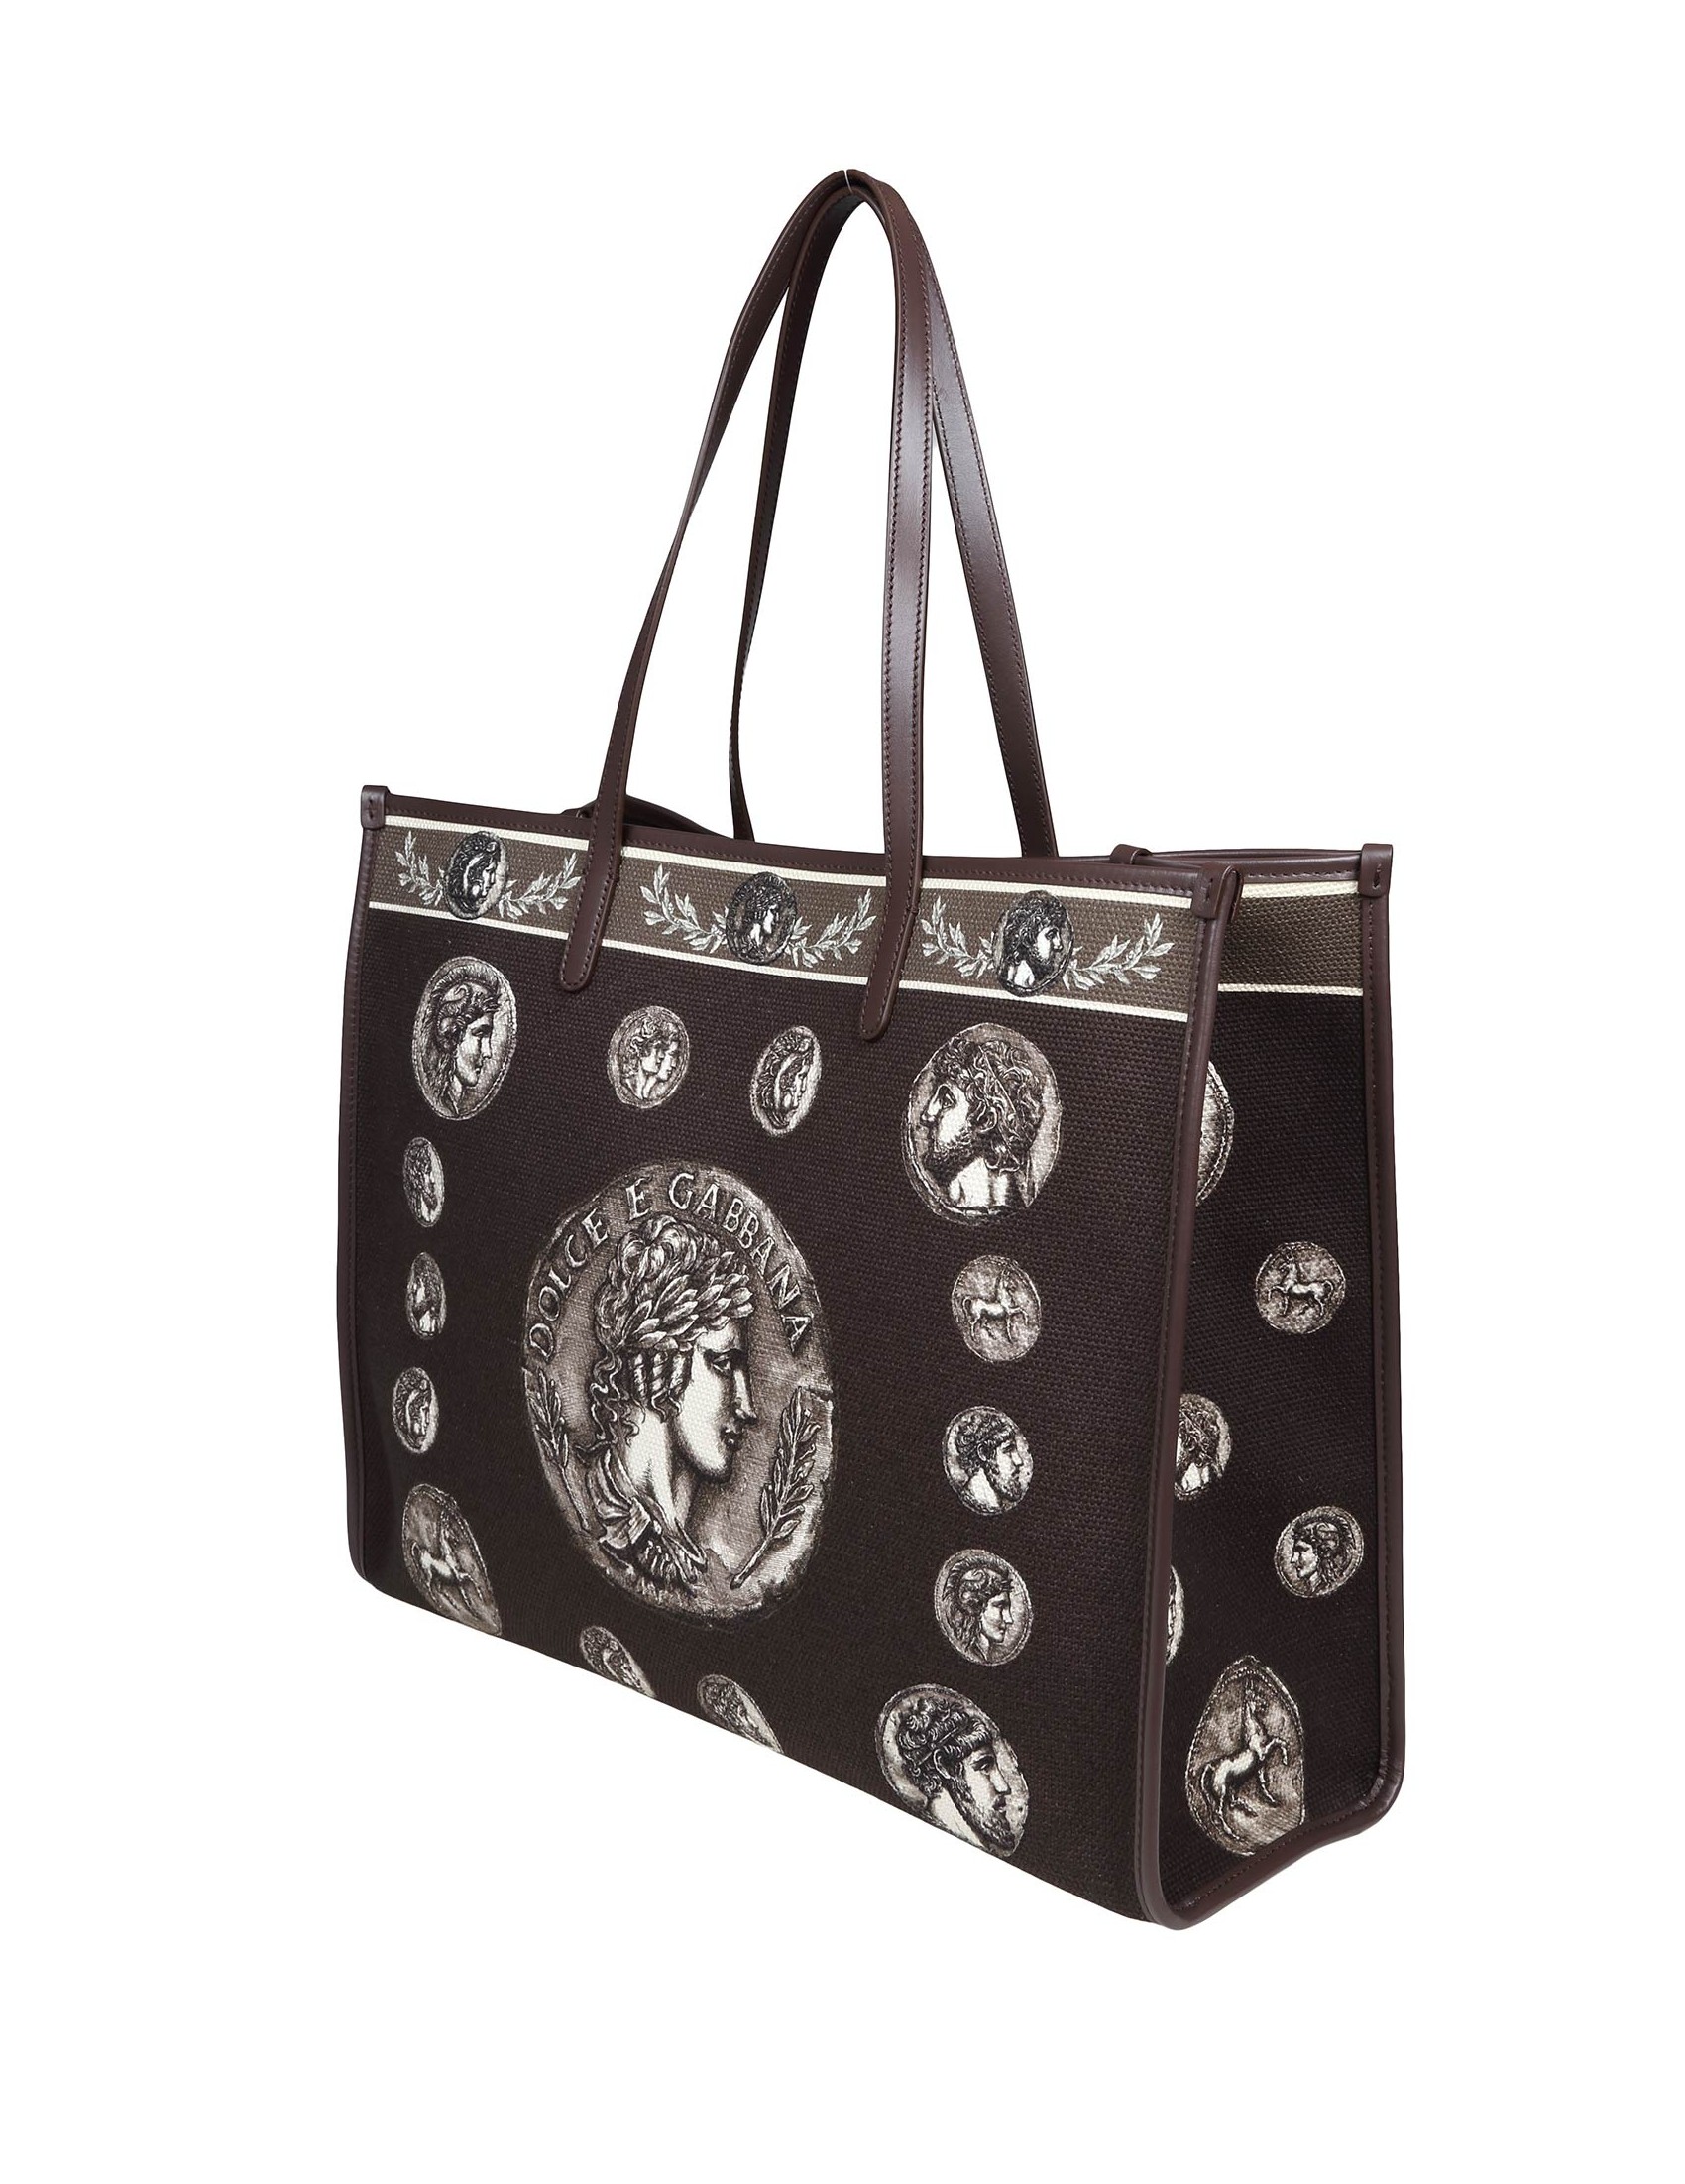 Dolce & Gabbana Small Shopping Bag In Canvas With D&g Milano Logo